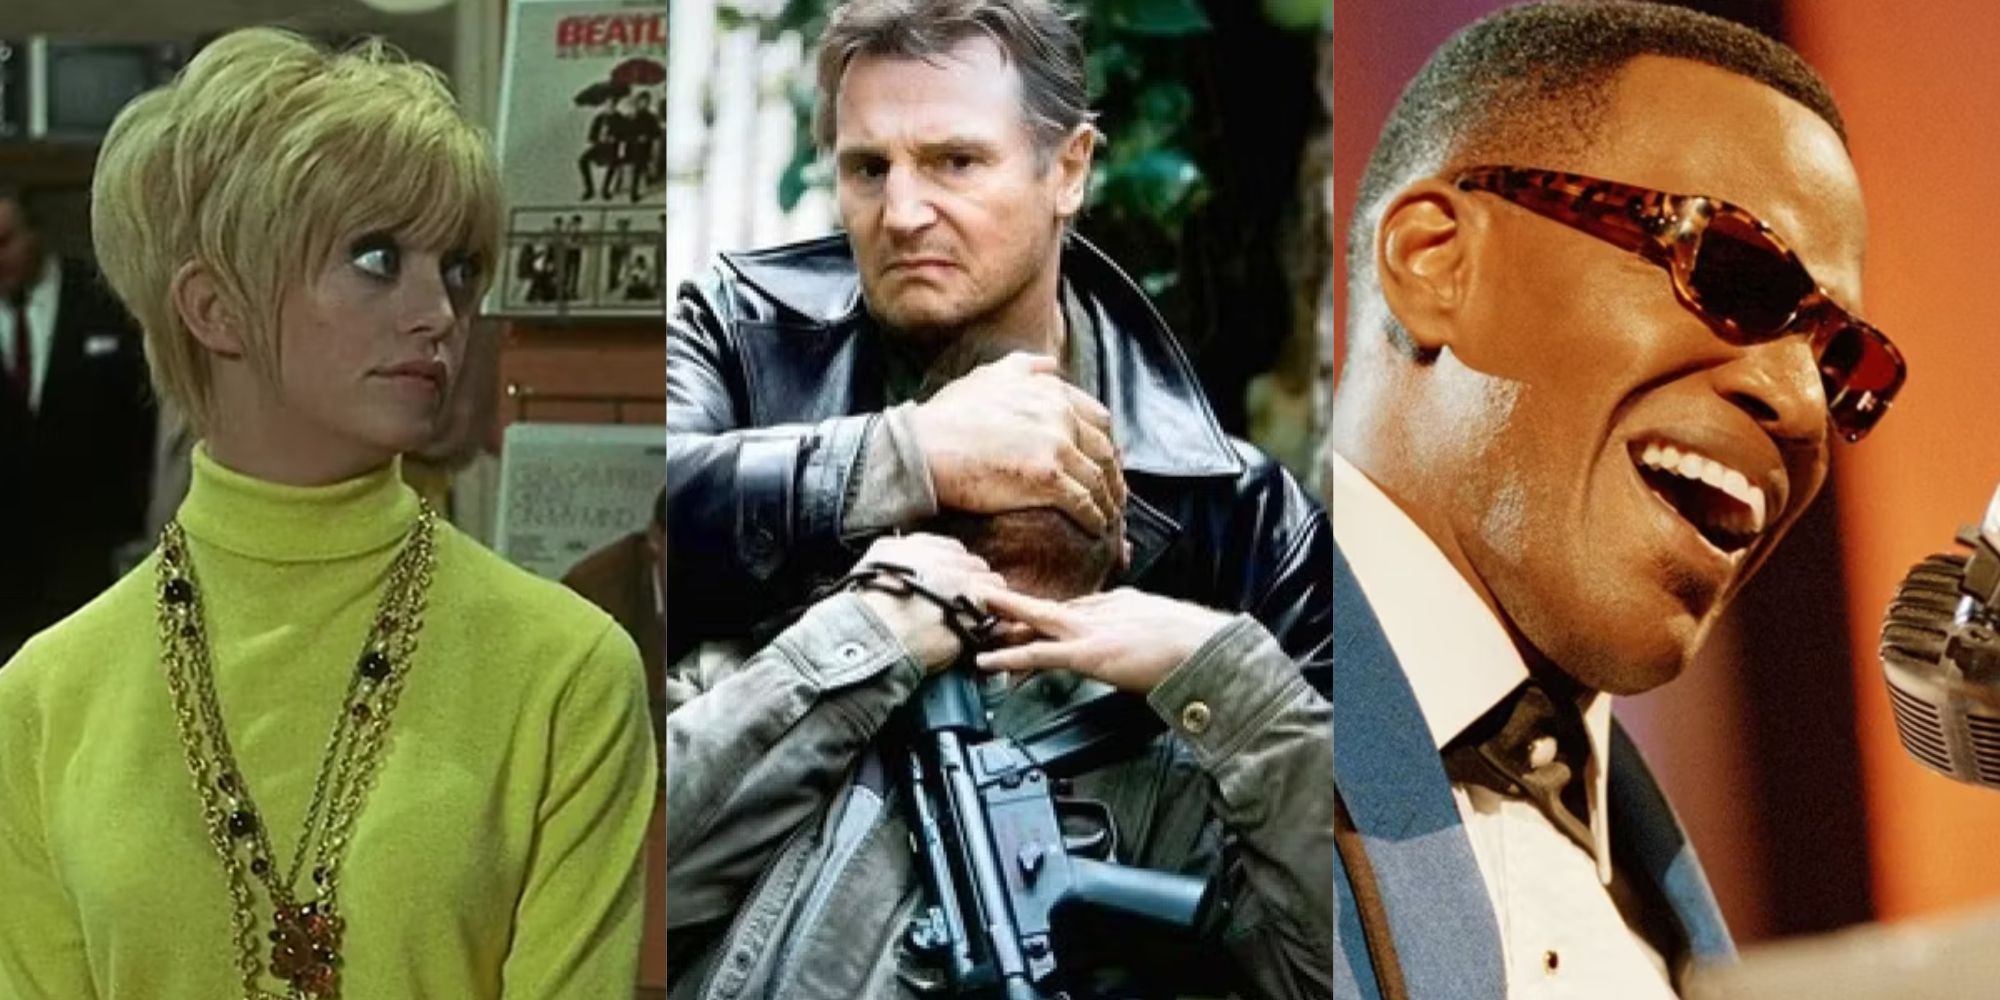 A split image of Goldie Hawn, Liam Neeson, and Jamie Foxx.